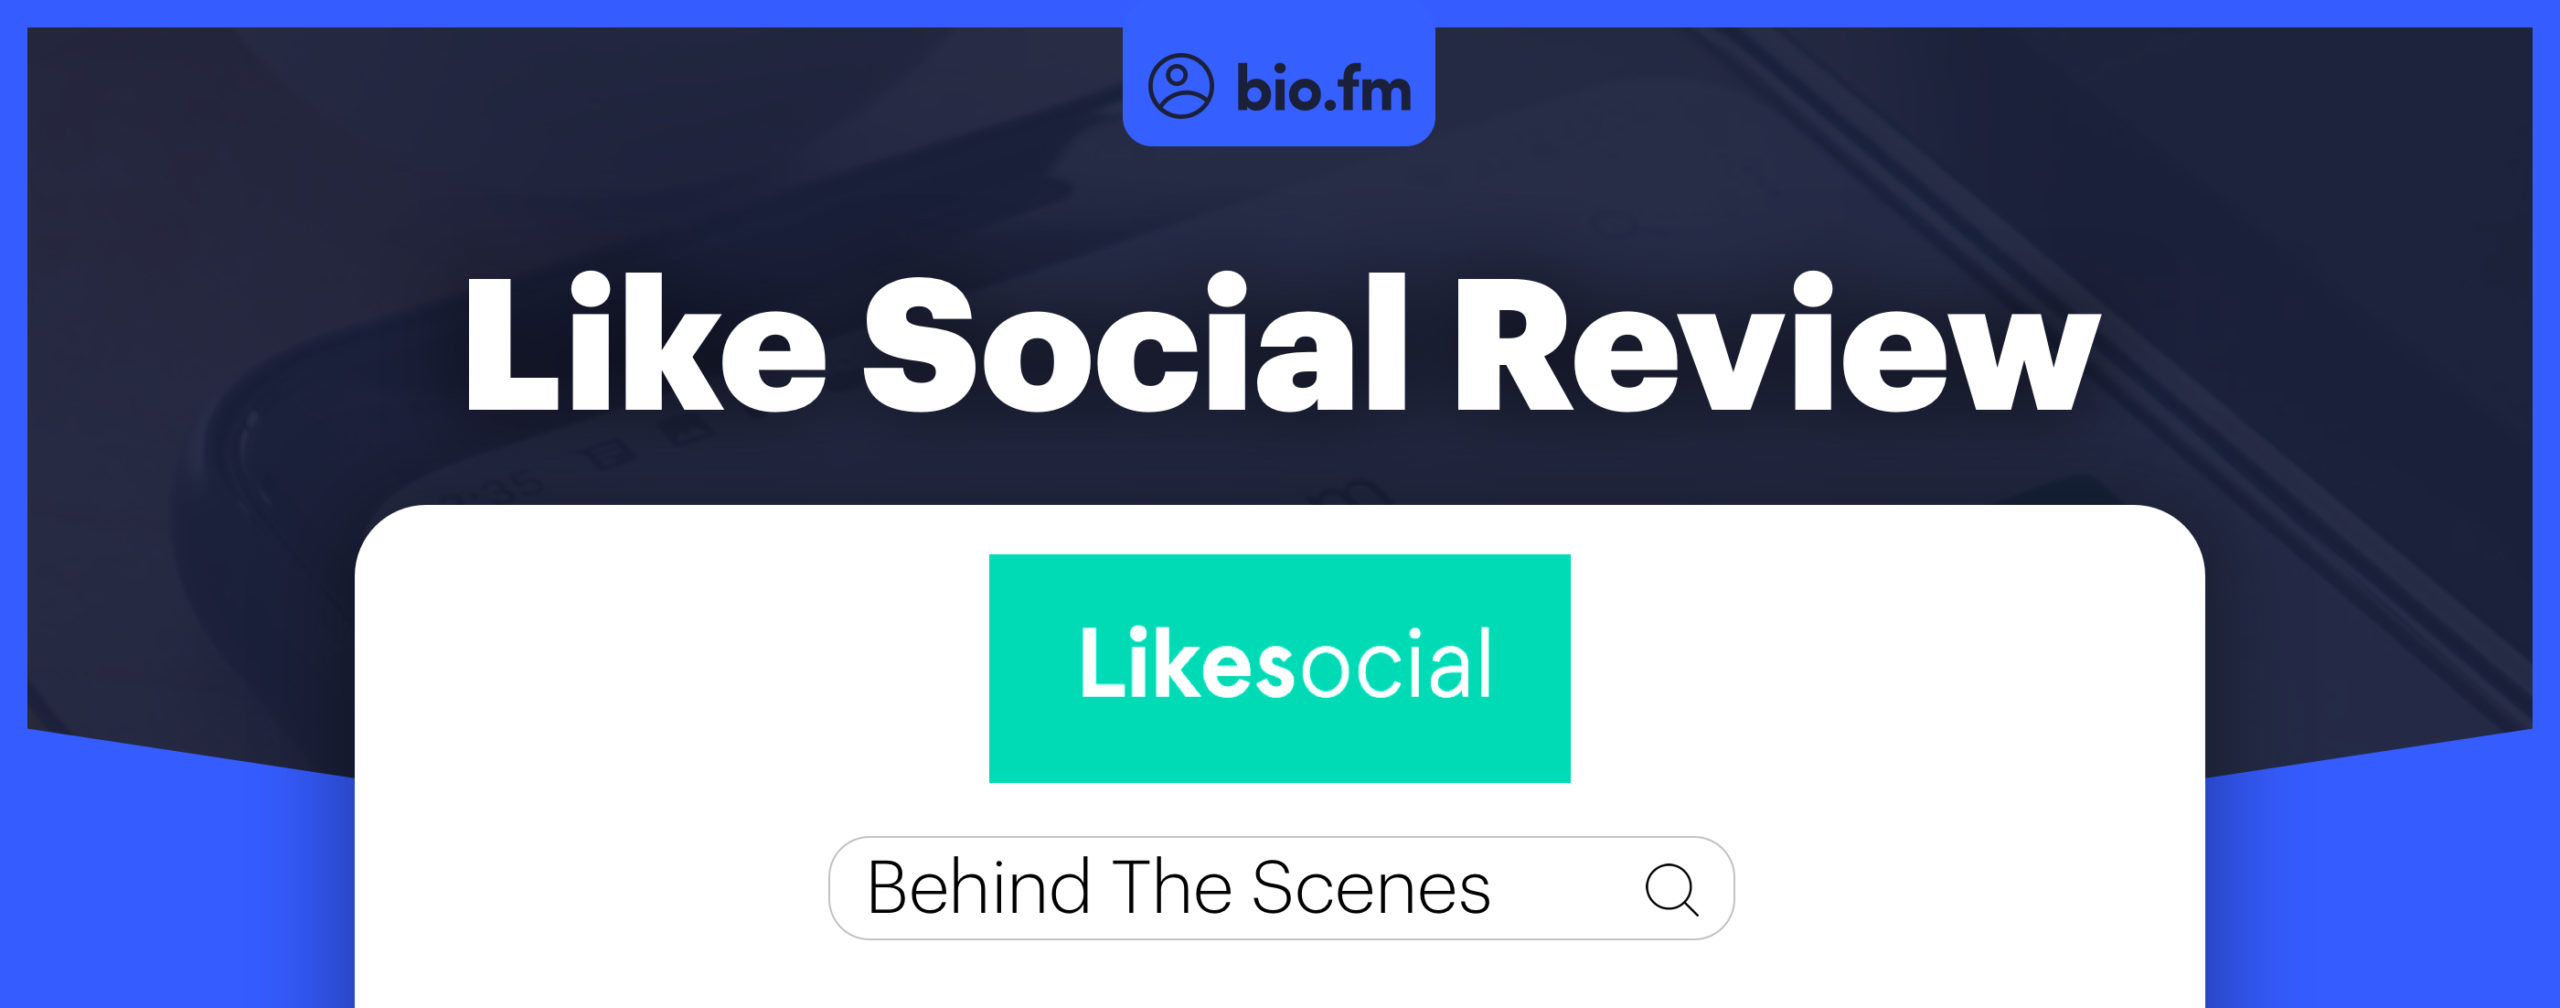 likesocial featured image